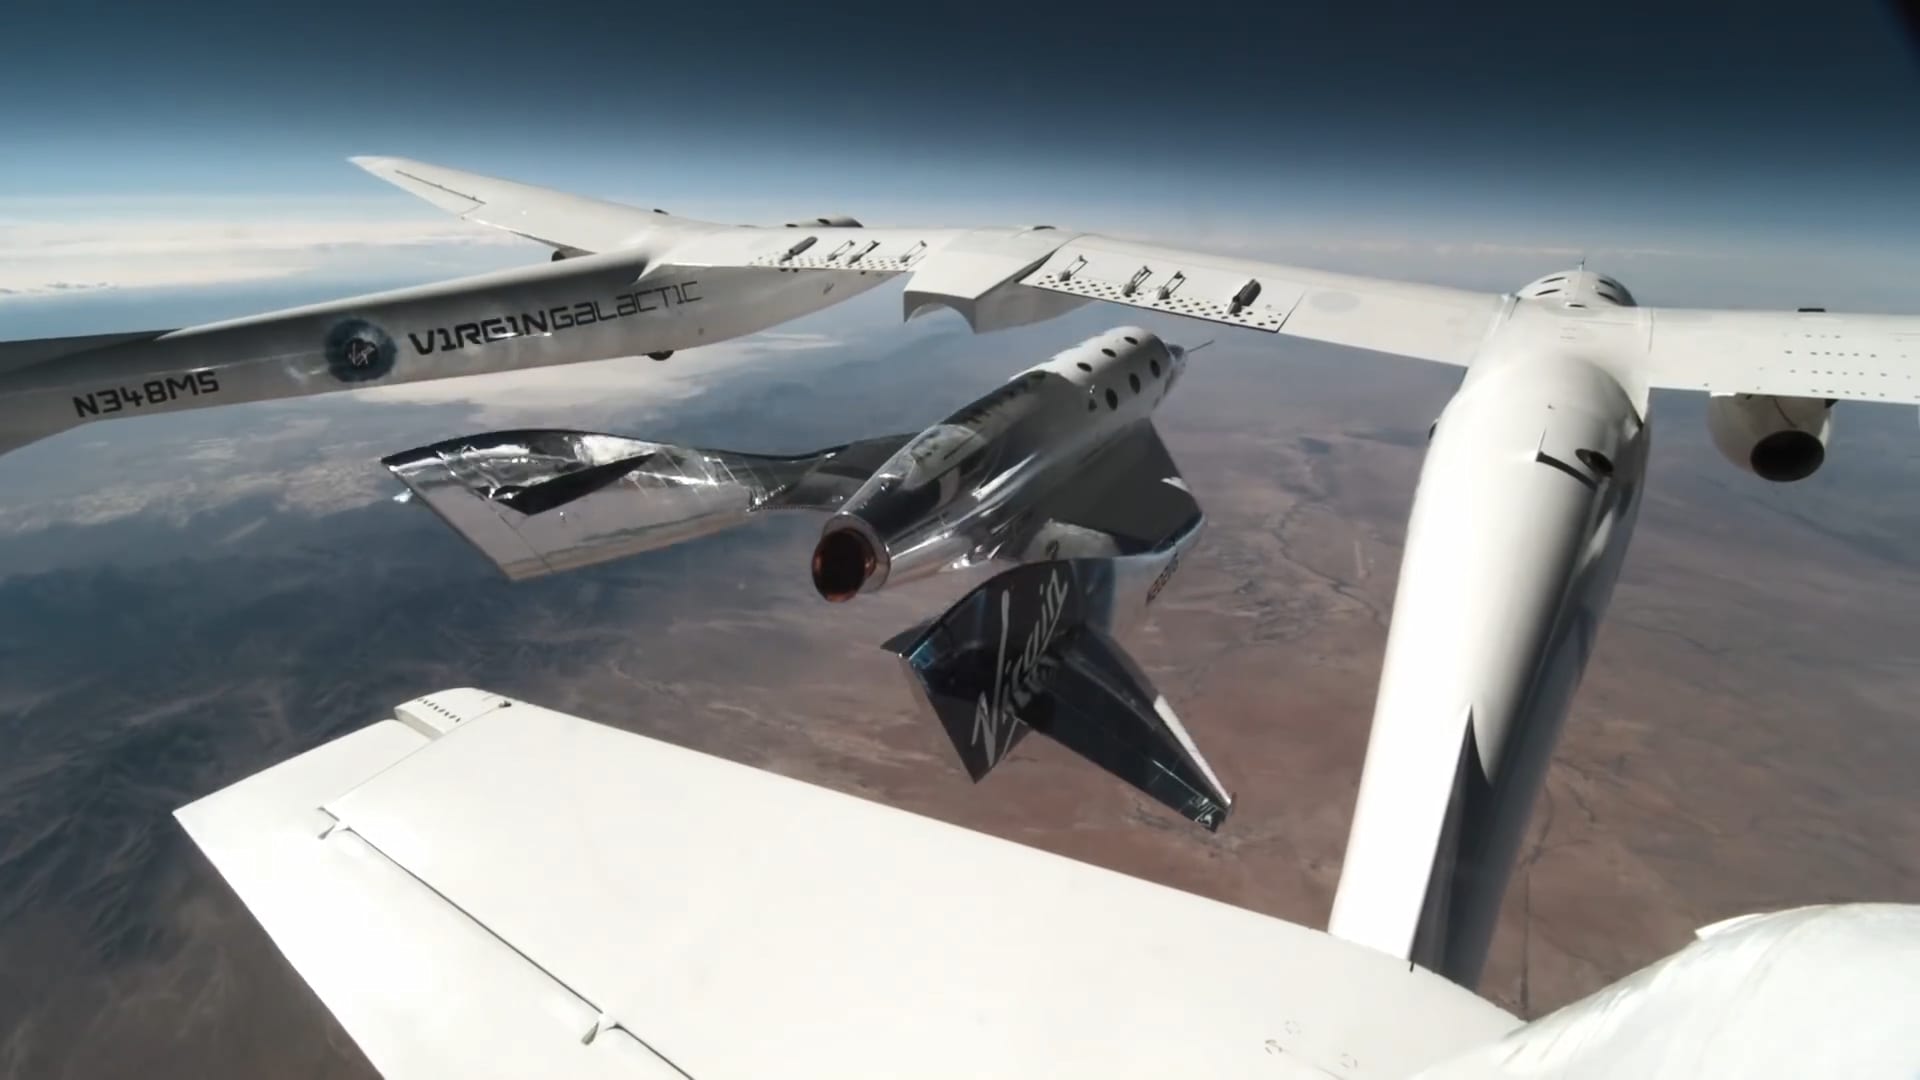 VSS Unity is released from carrier aircraft VMS Eve during the launch of its third spaceflight on May 22, 2021.